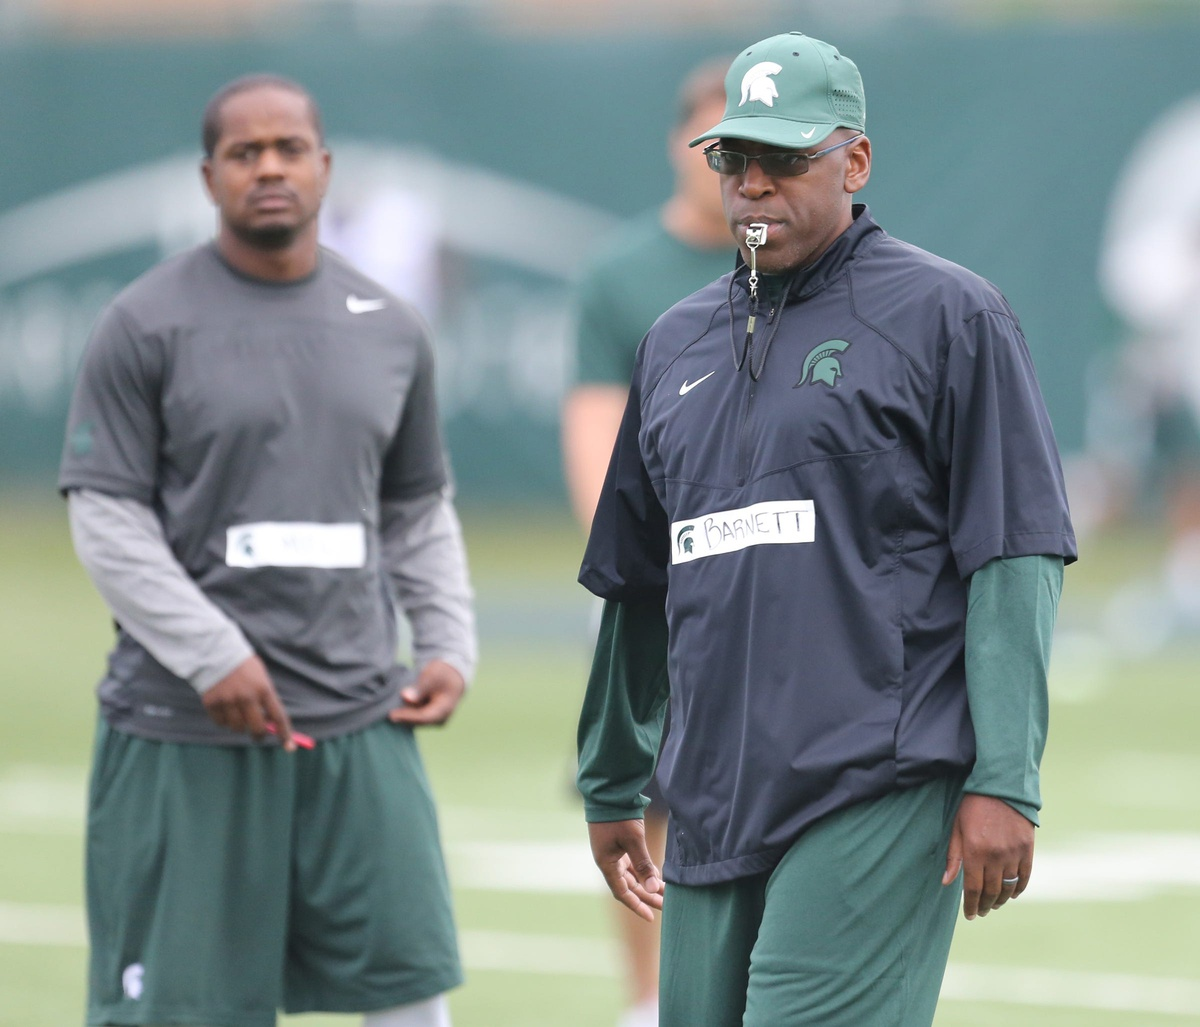 Who should be Michigan State's next head coach?